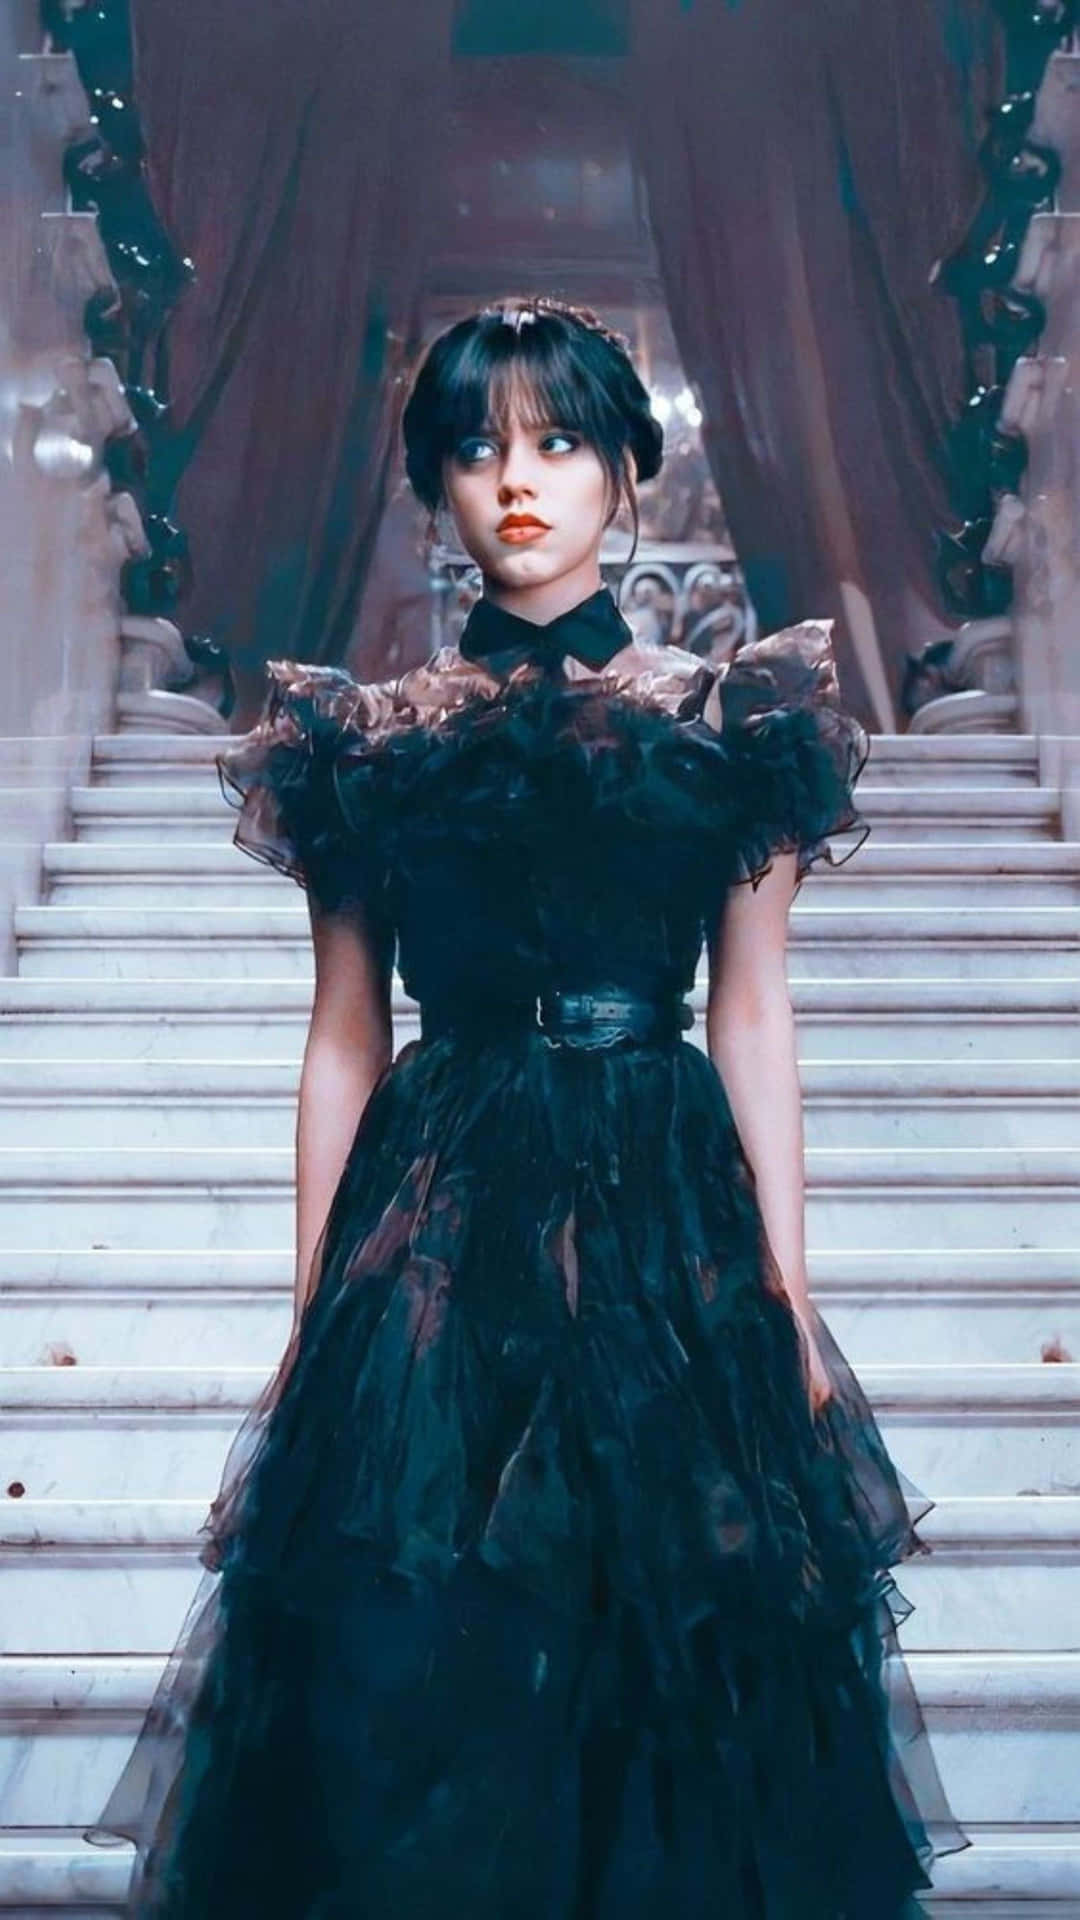 Gothic Elegance Staircase Pose Wallpaper